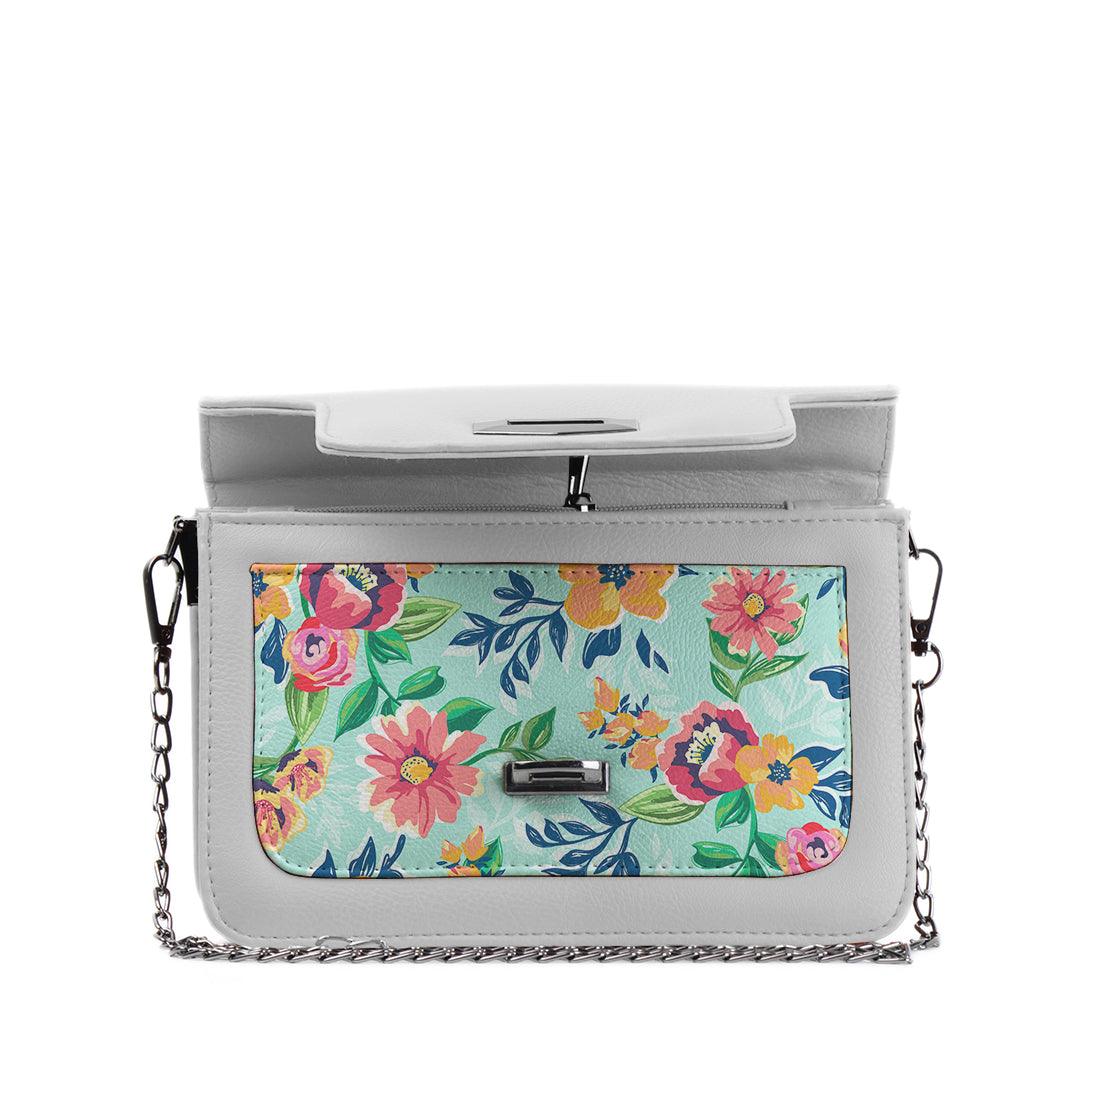 White Mini Embossed Chain Bag Floral - CANVAEGYPT